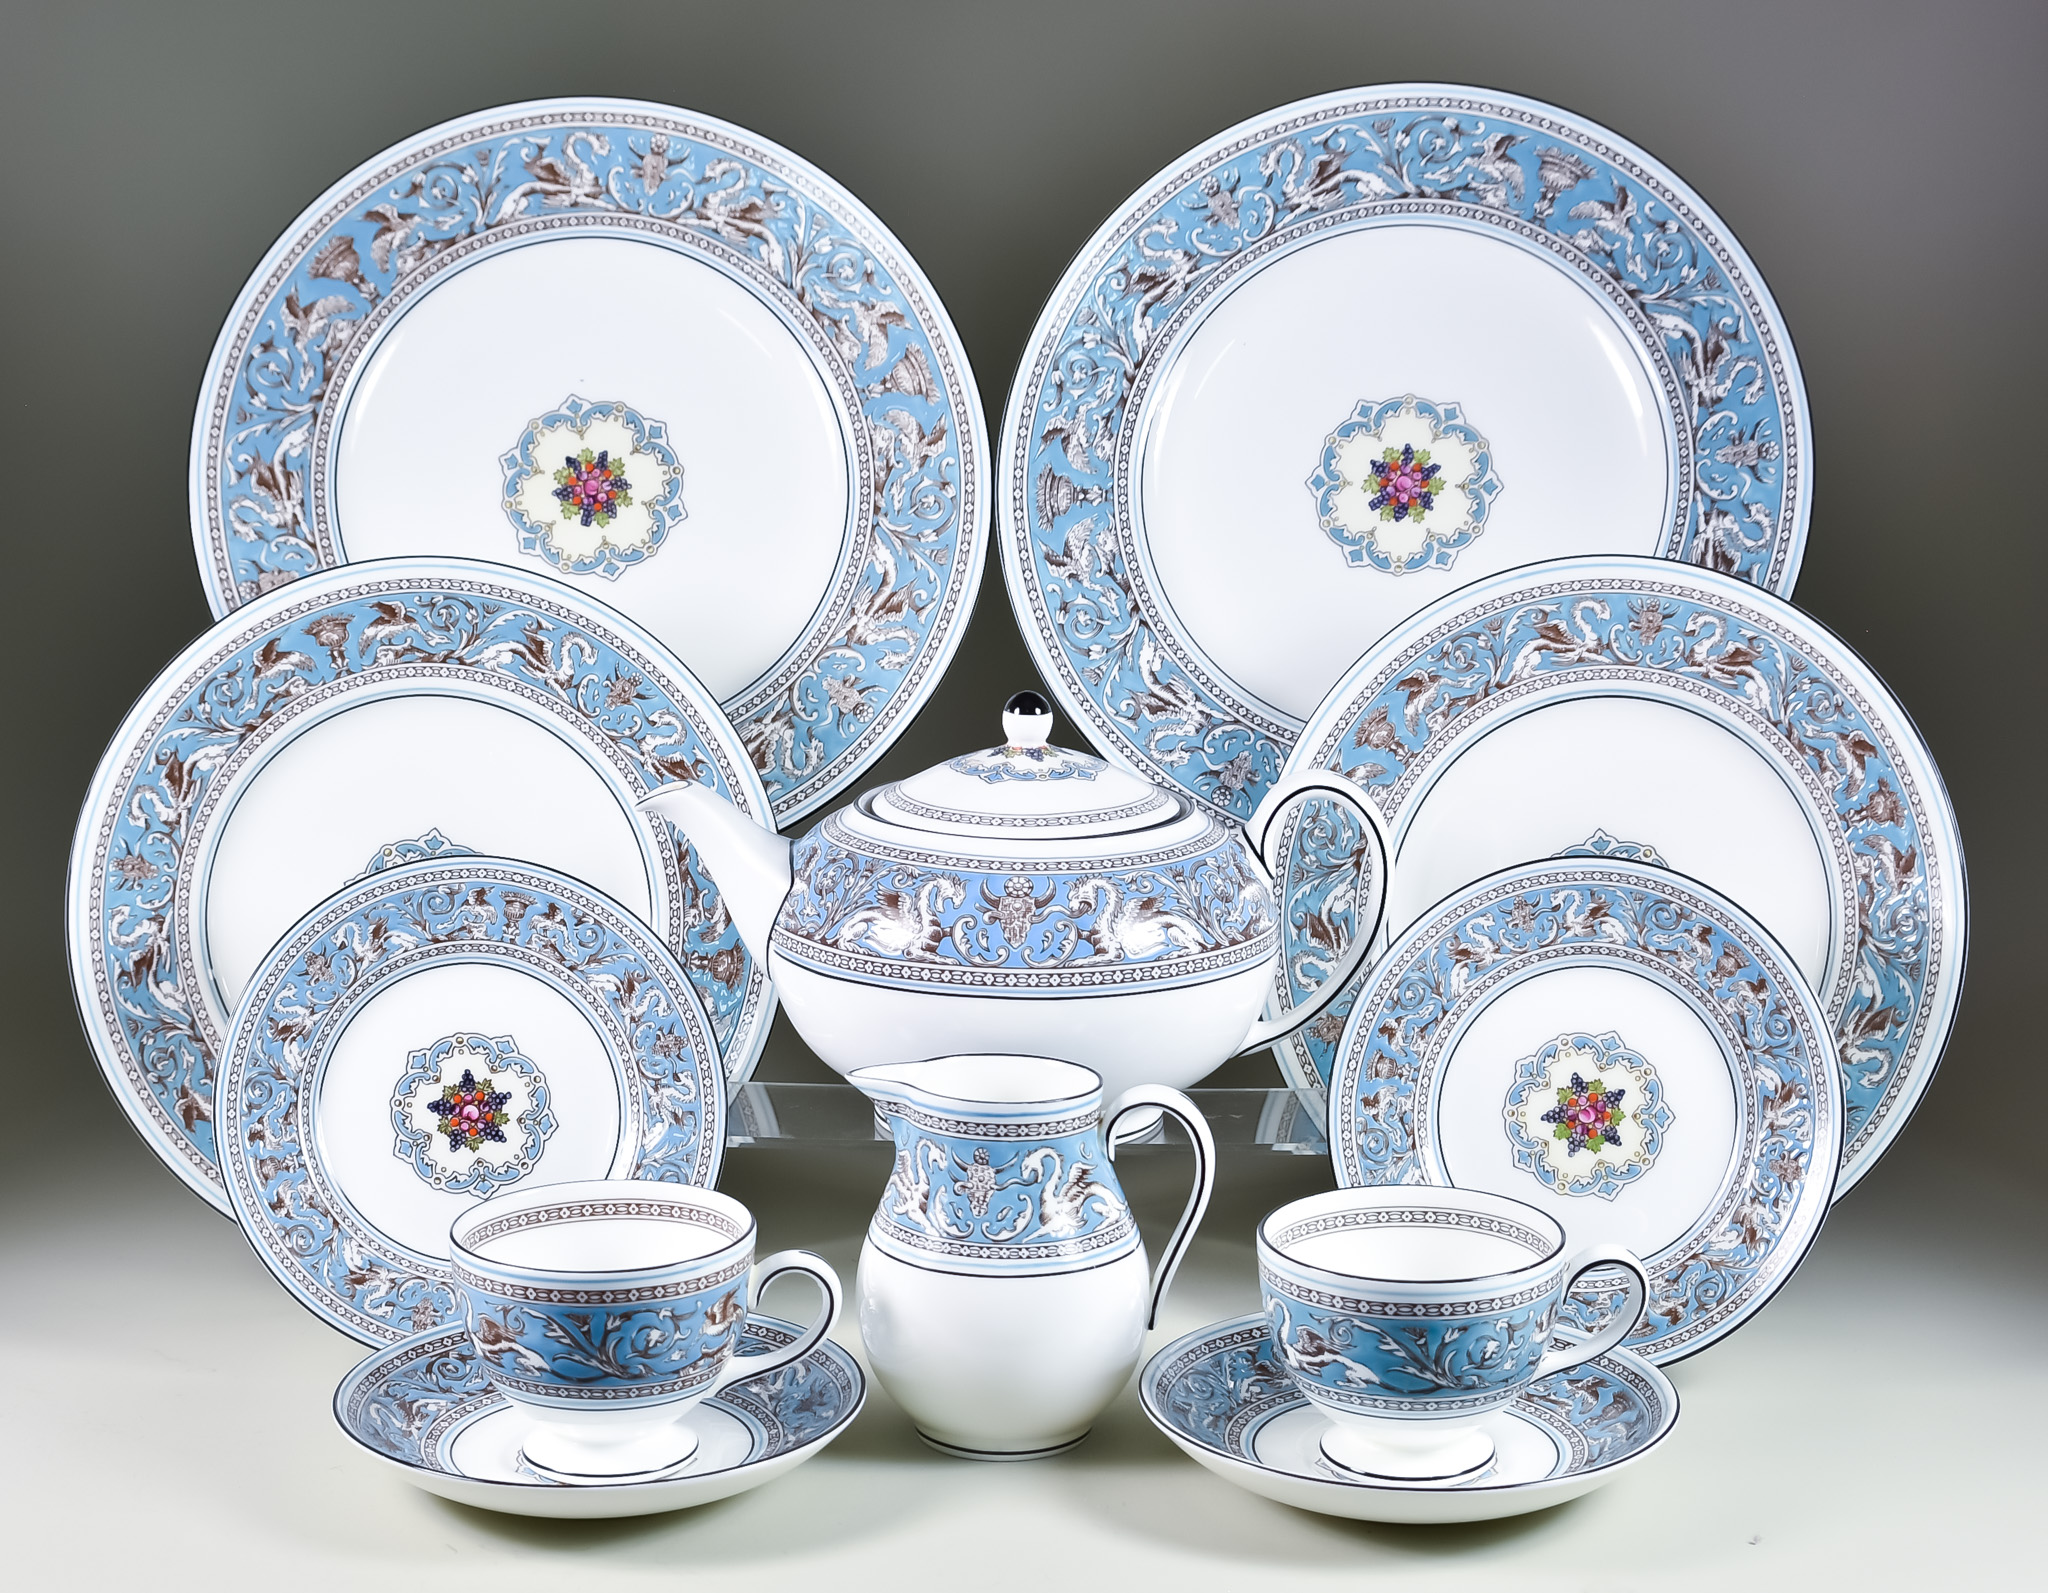 A Wedgewood Bone China "Florentine Turquoise" Pattern Tea Service, comprising - seven tea cups,